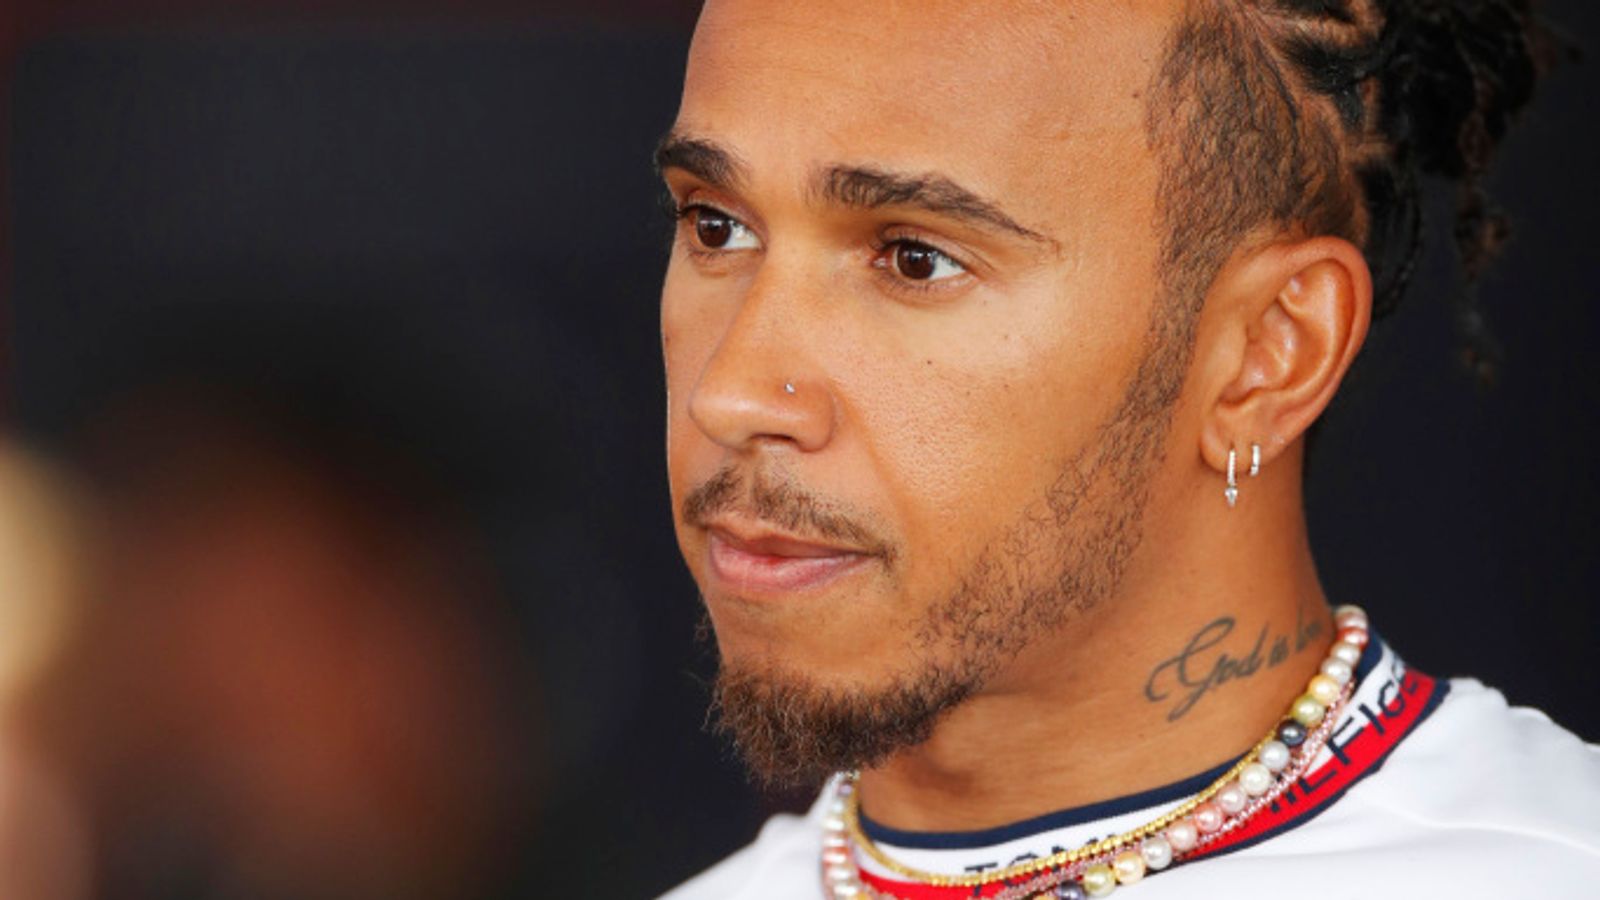 lewis-hamilton-says-mercedes-could-struggle-to-make-the-top-10-in-spanish-gp-qualifying-despite-upgrades